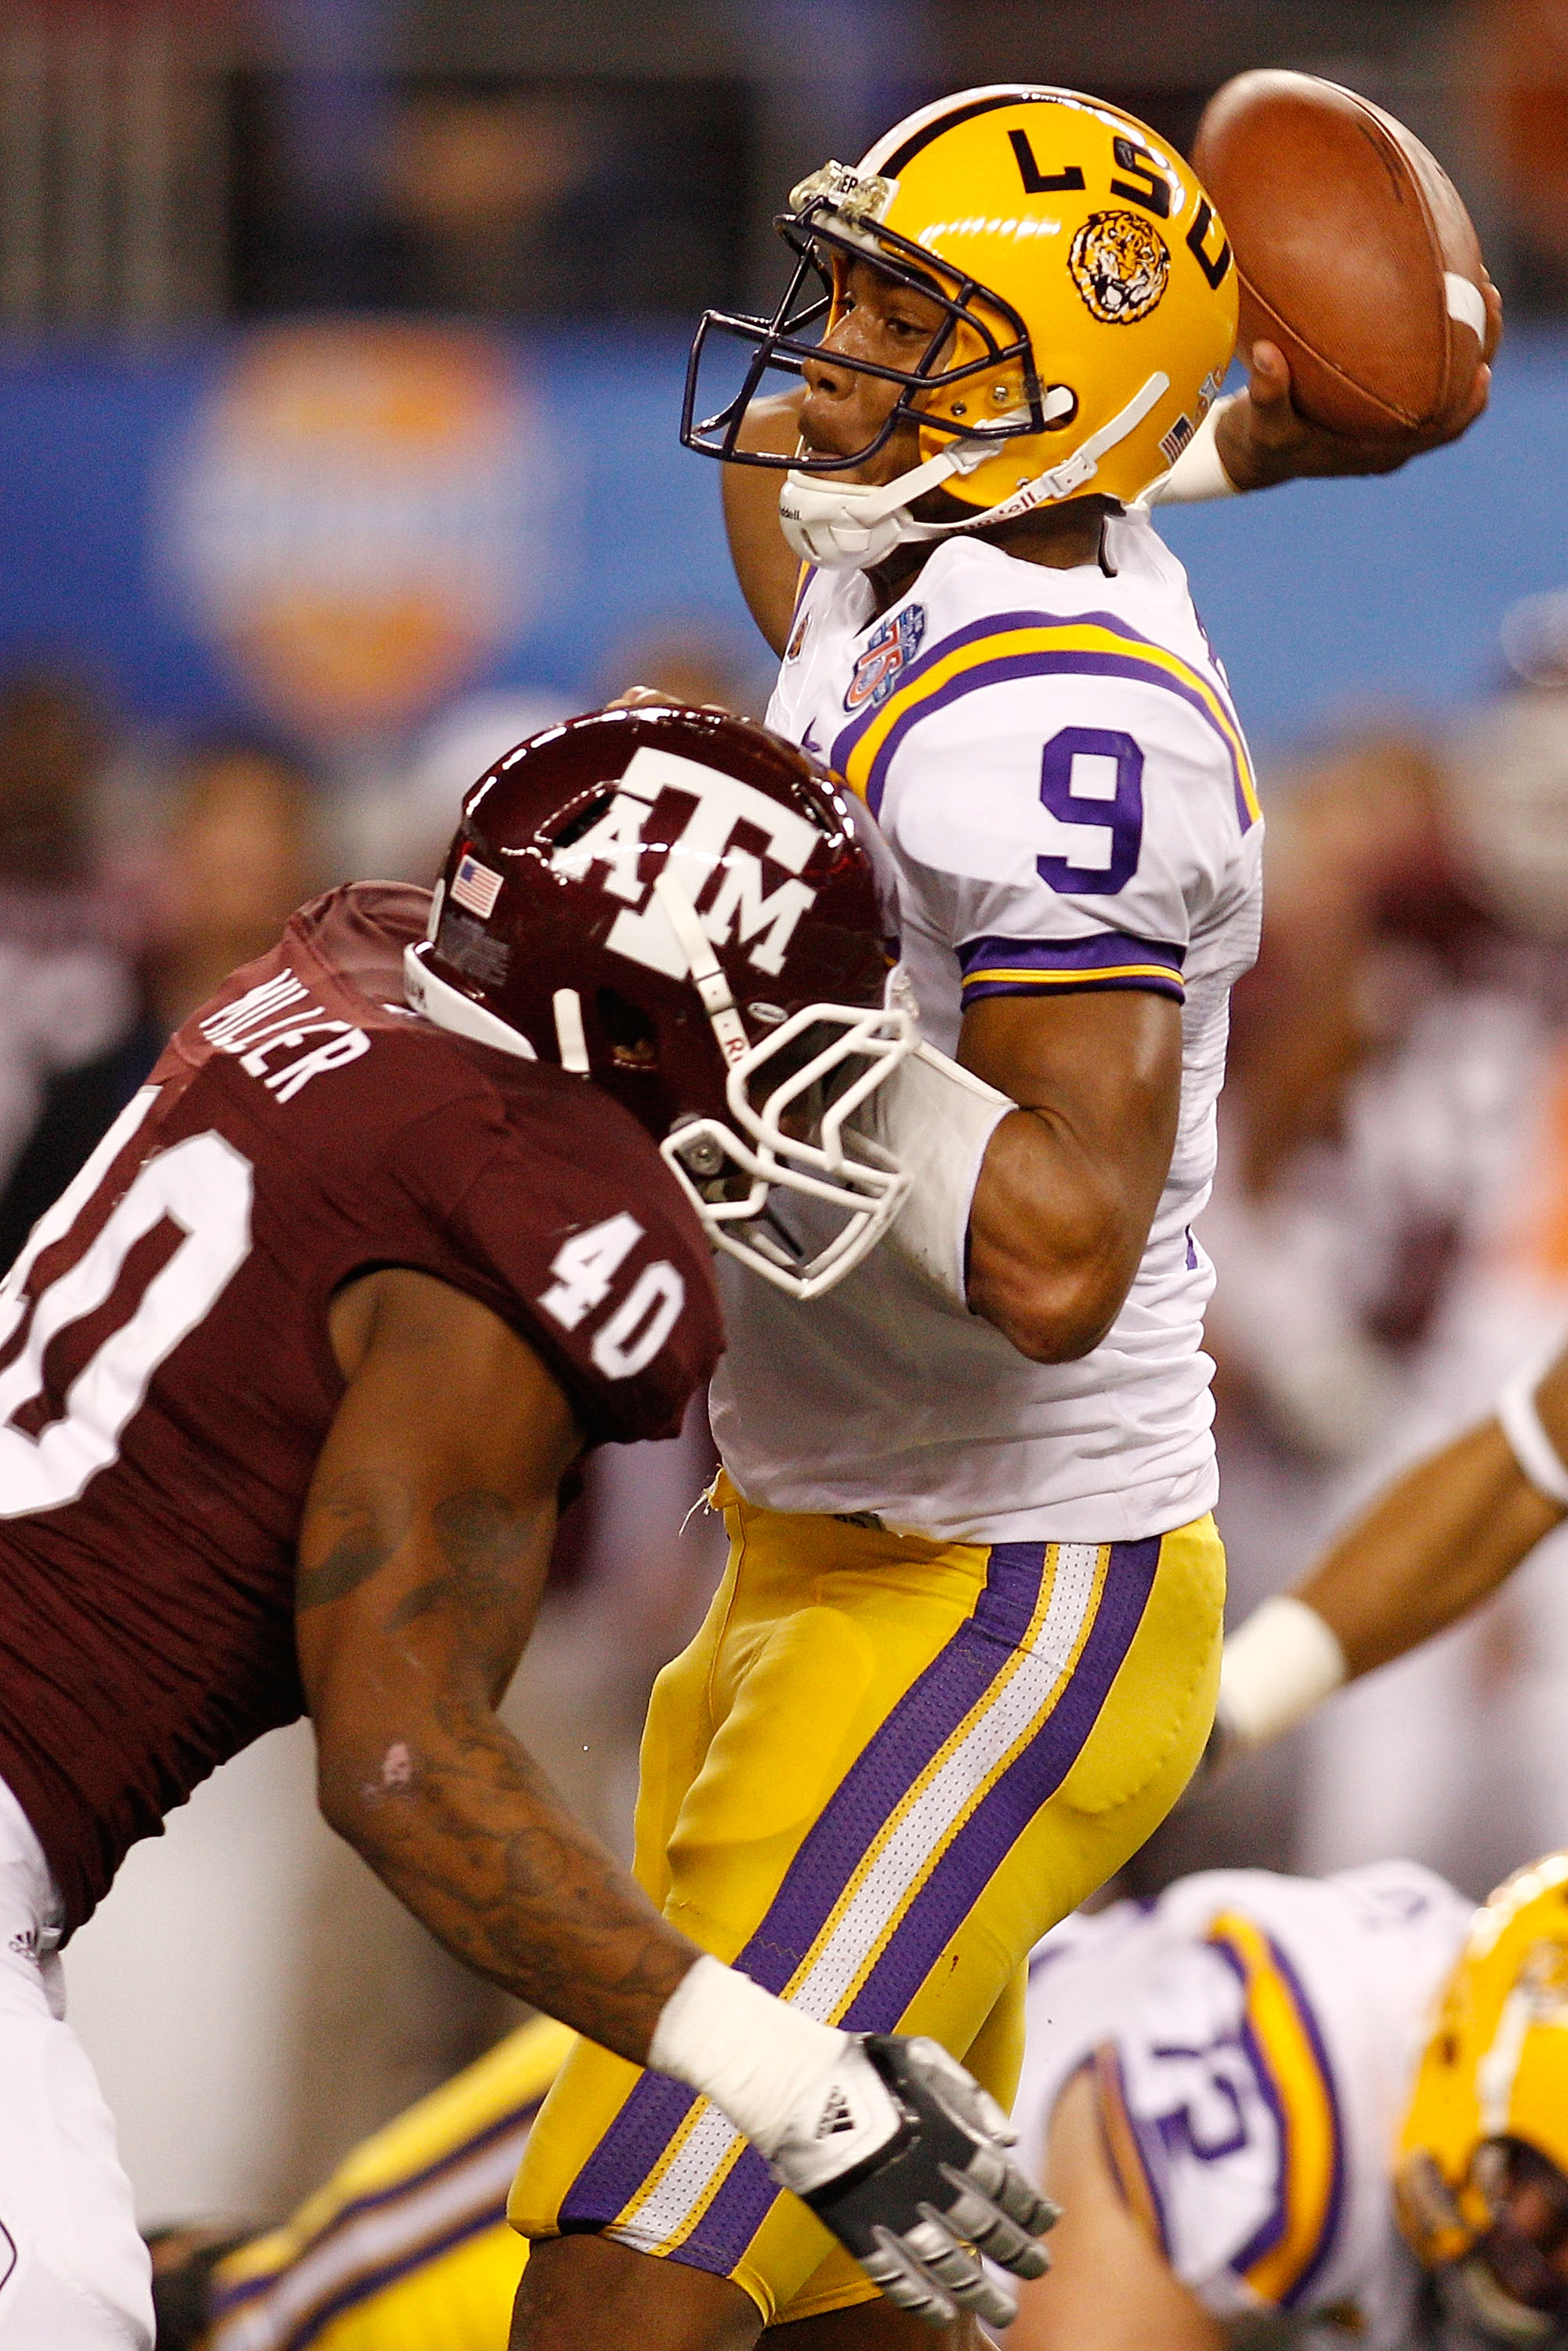 ARLINGTON, TX - JANUARY 07:  Jordan Jefferson #9 of the Louisiana State University Tigers throws under pressure from Von Miller #40 of the Texas A&M Aggies during the AT&T Cotton Bowl at Cowboys Stadium on January 7, 2011 in Arlington, Texas.  (Photo by C